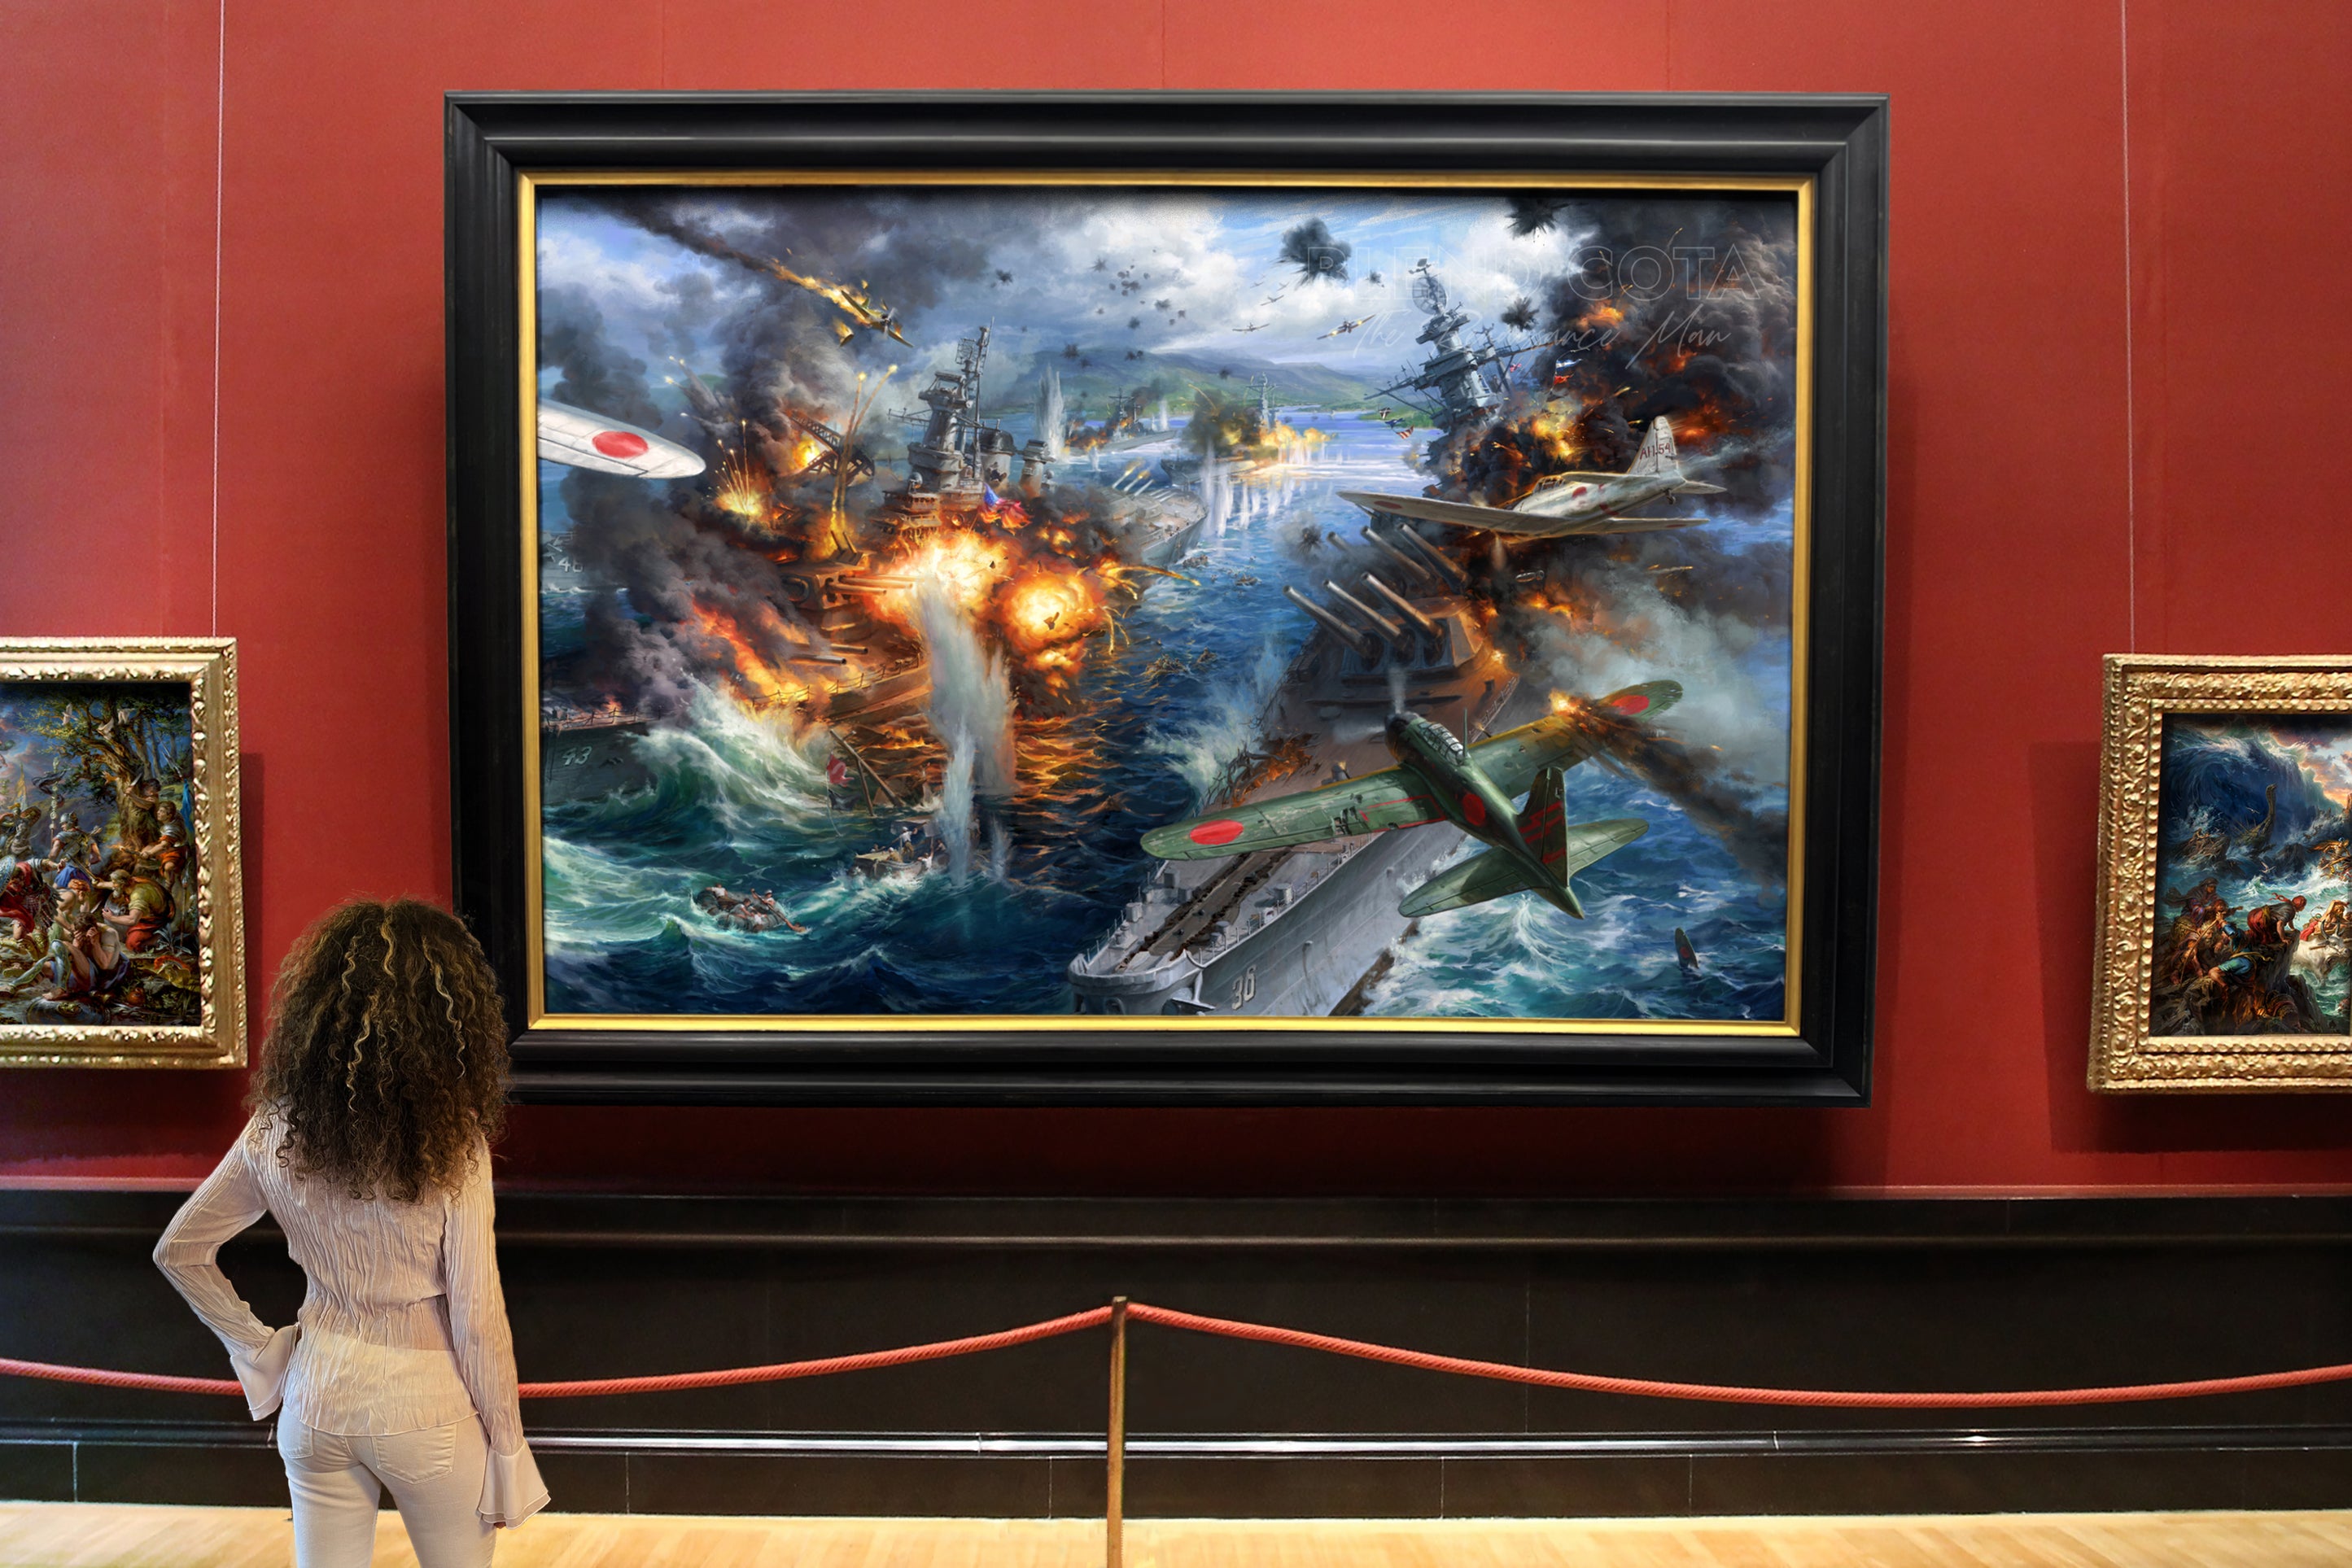 art gallery and museum room setting for Oil on canvas painting of the attack on Pearl Harbor, Japanese planes bombing American vessels and battleships, on a background of destruction, smoke and fire, realism style with detailed brushstrokes.